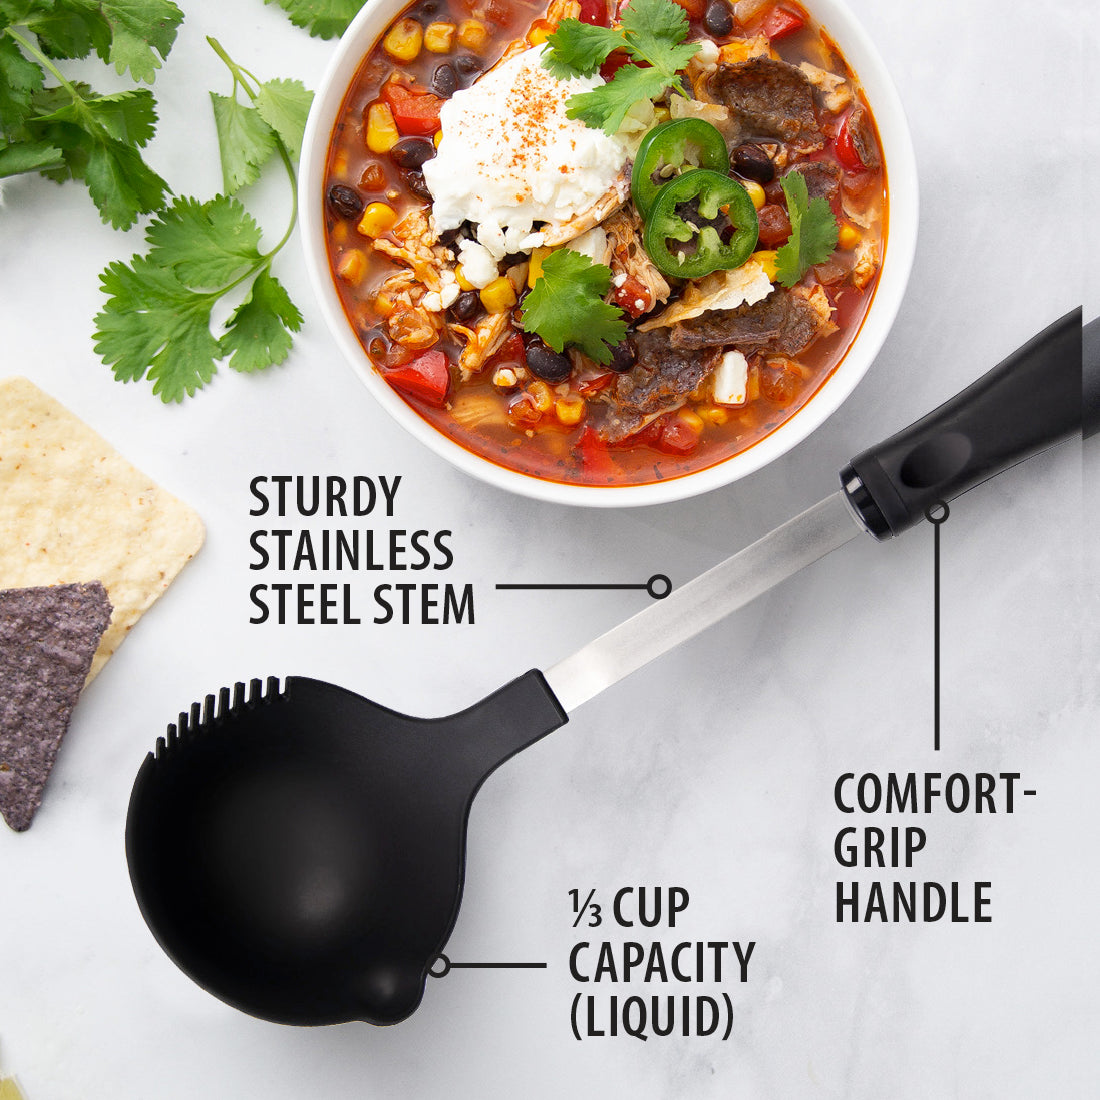 Non-scratch Rada Cutlery Ladle with chili, sour cream, chips, and jalapenos.